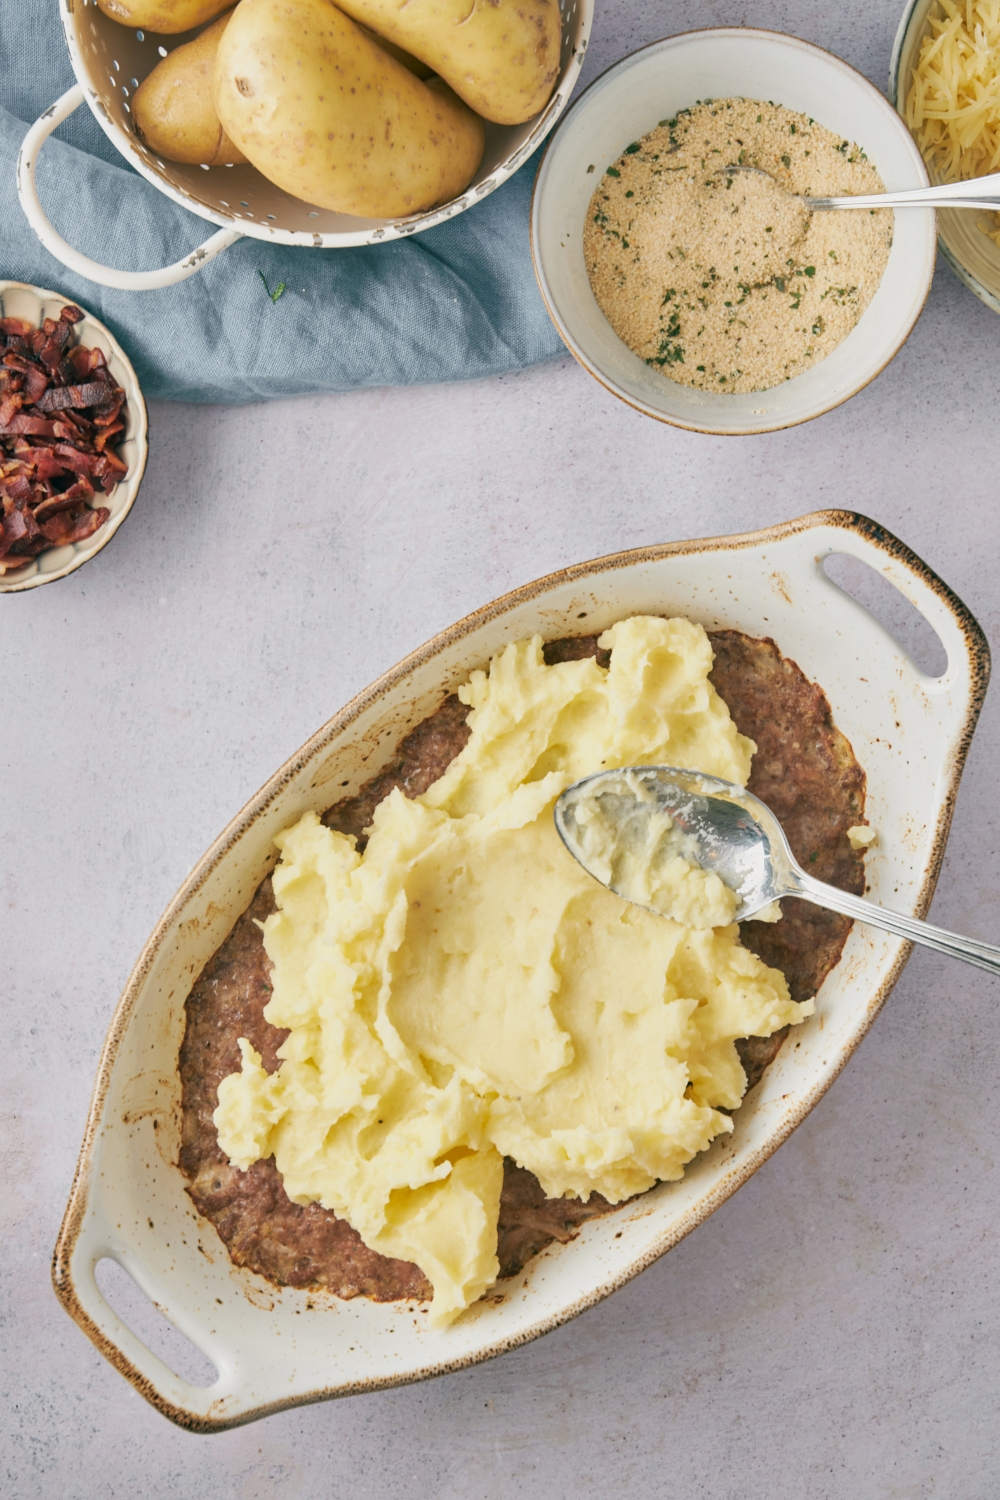 A spoon spreading mashed potatoes over brown meat mixture in a white casserole dish.